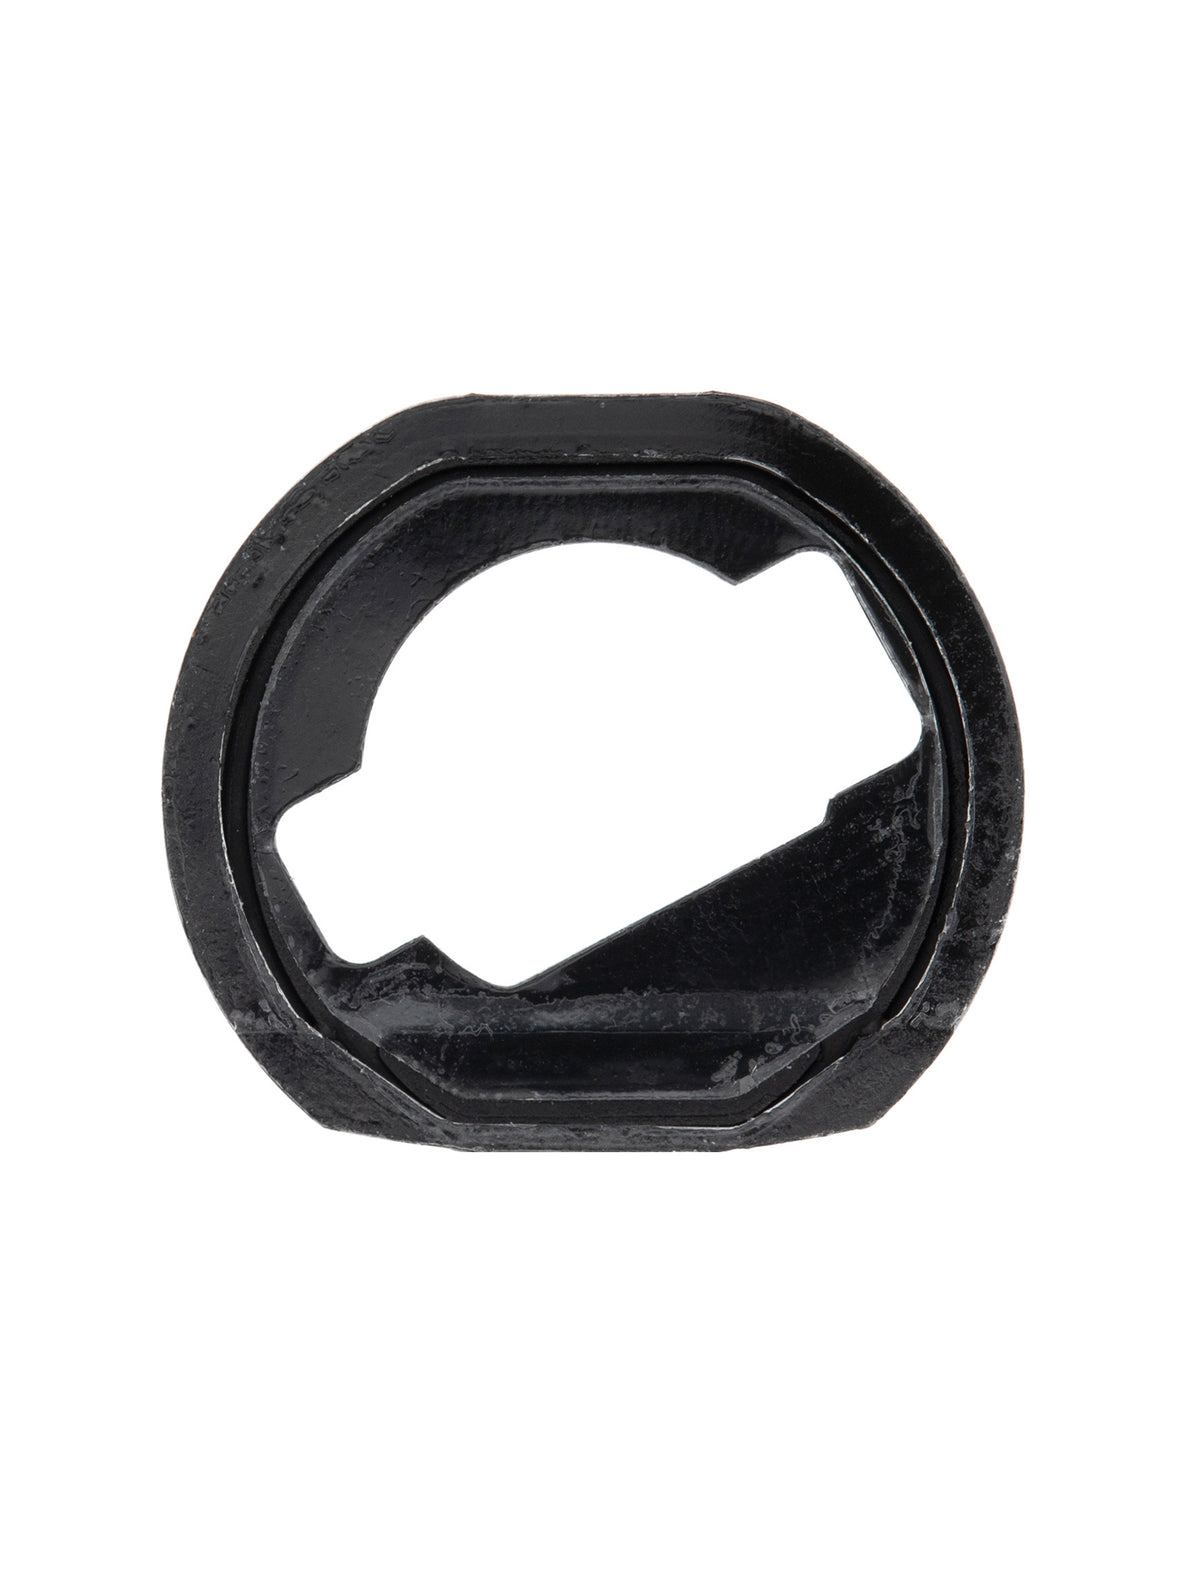 BLACK HOME BUTTON SPACER RING (10 PACK) COMPATIBLE FOR IPAD PRO 10.5" 1ST